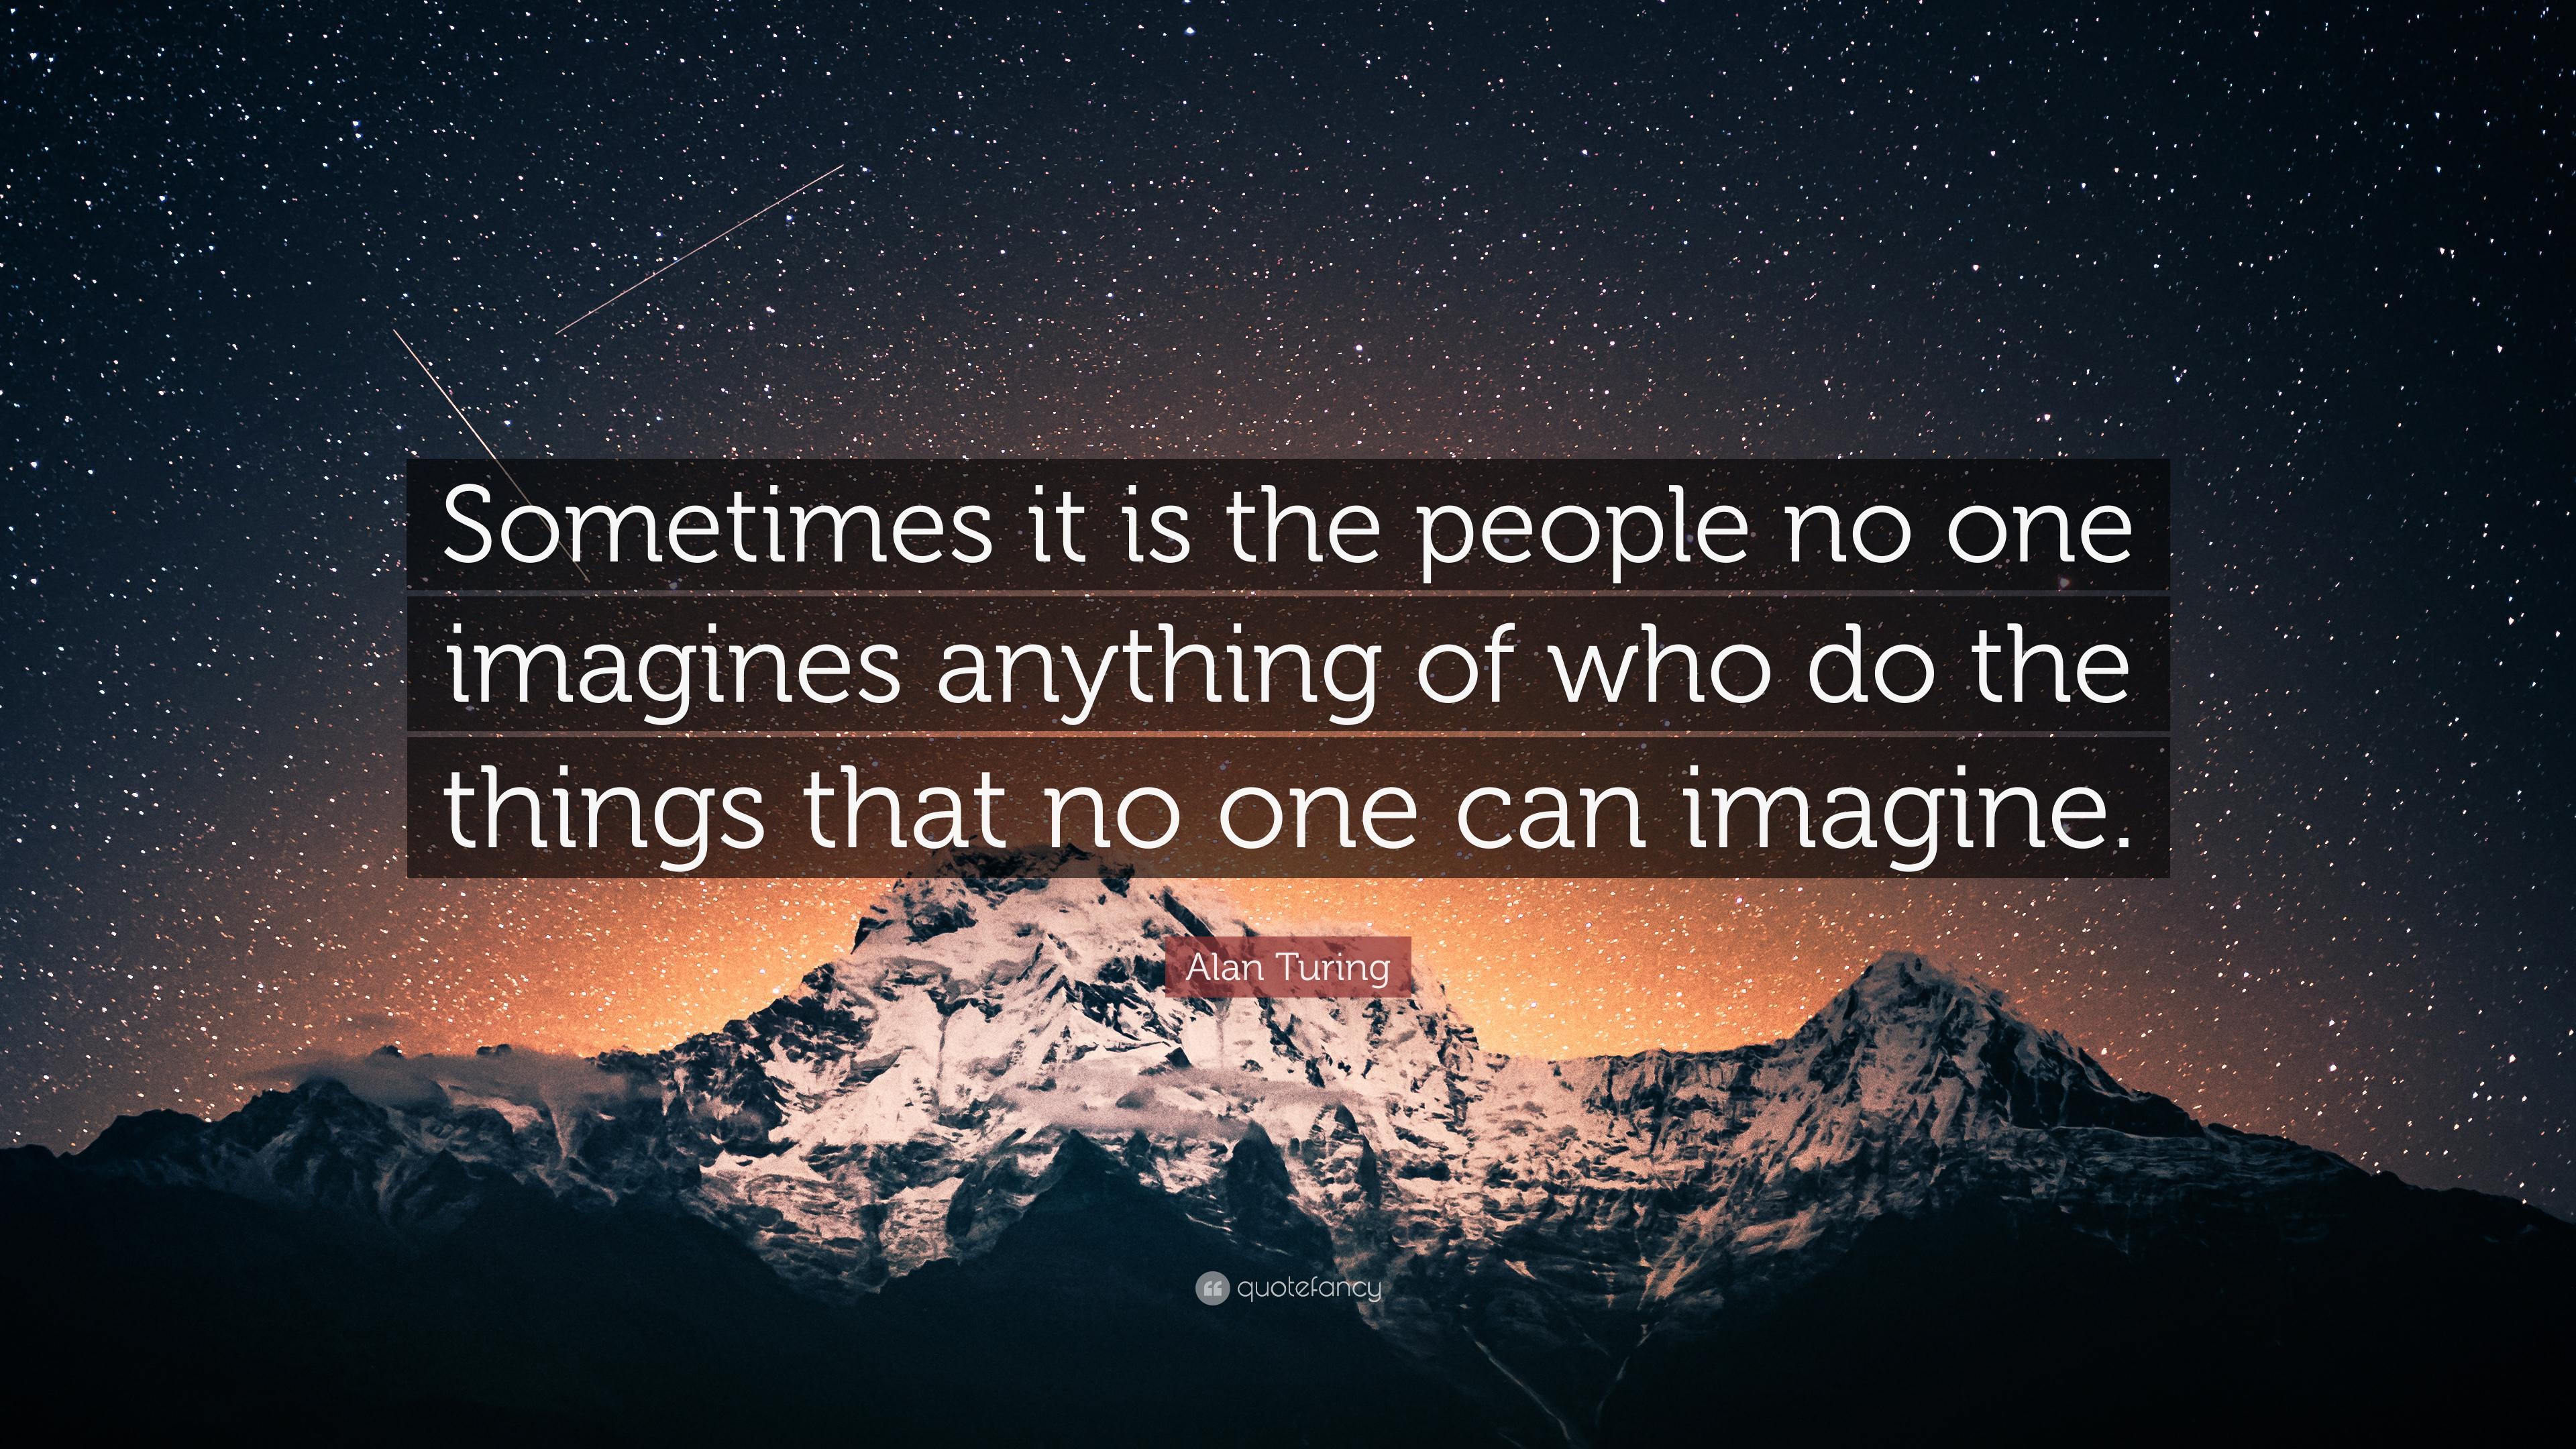 Alan Turing Quote: “Sometimes it is the people no one imagines